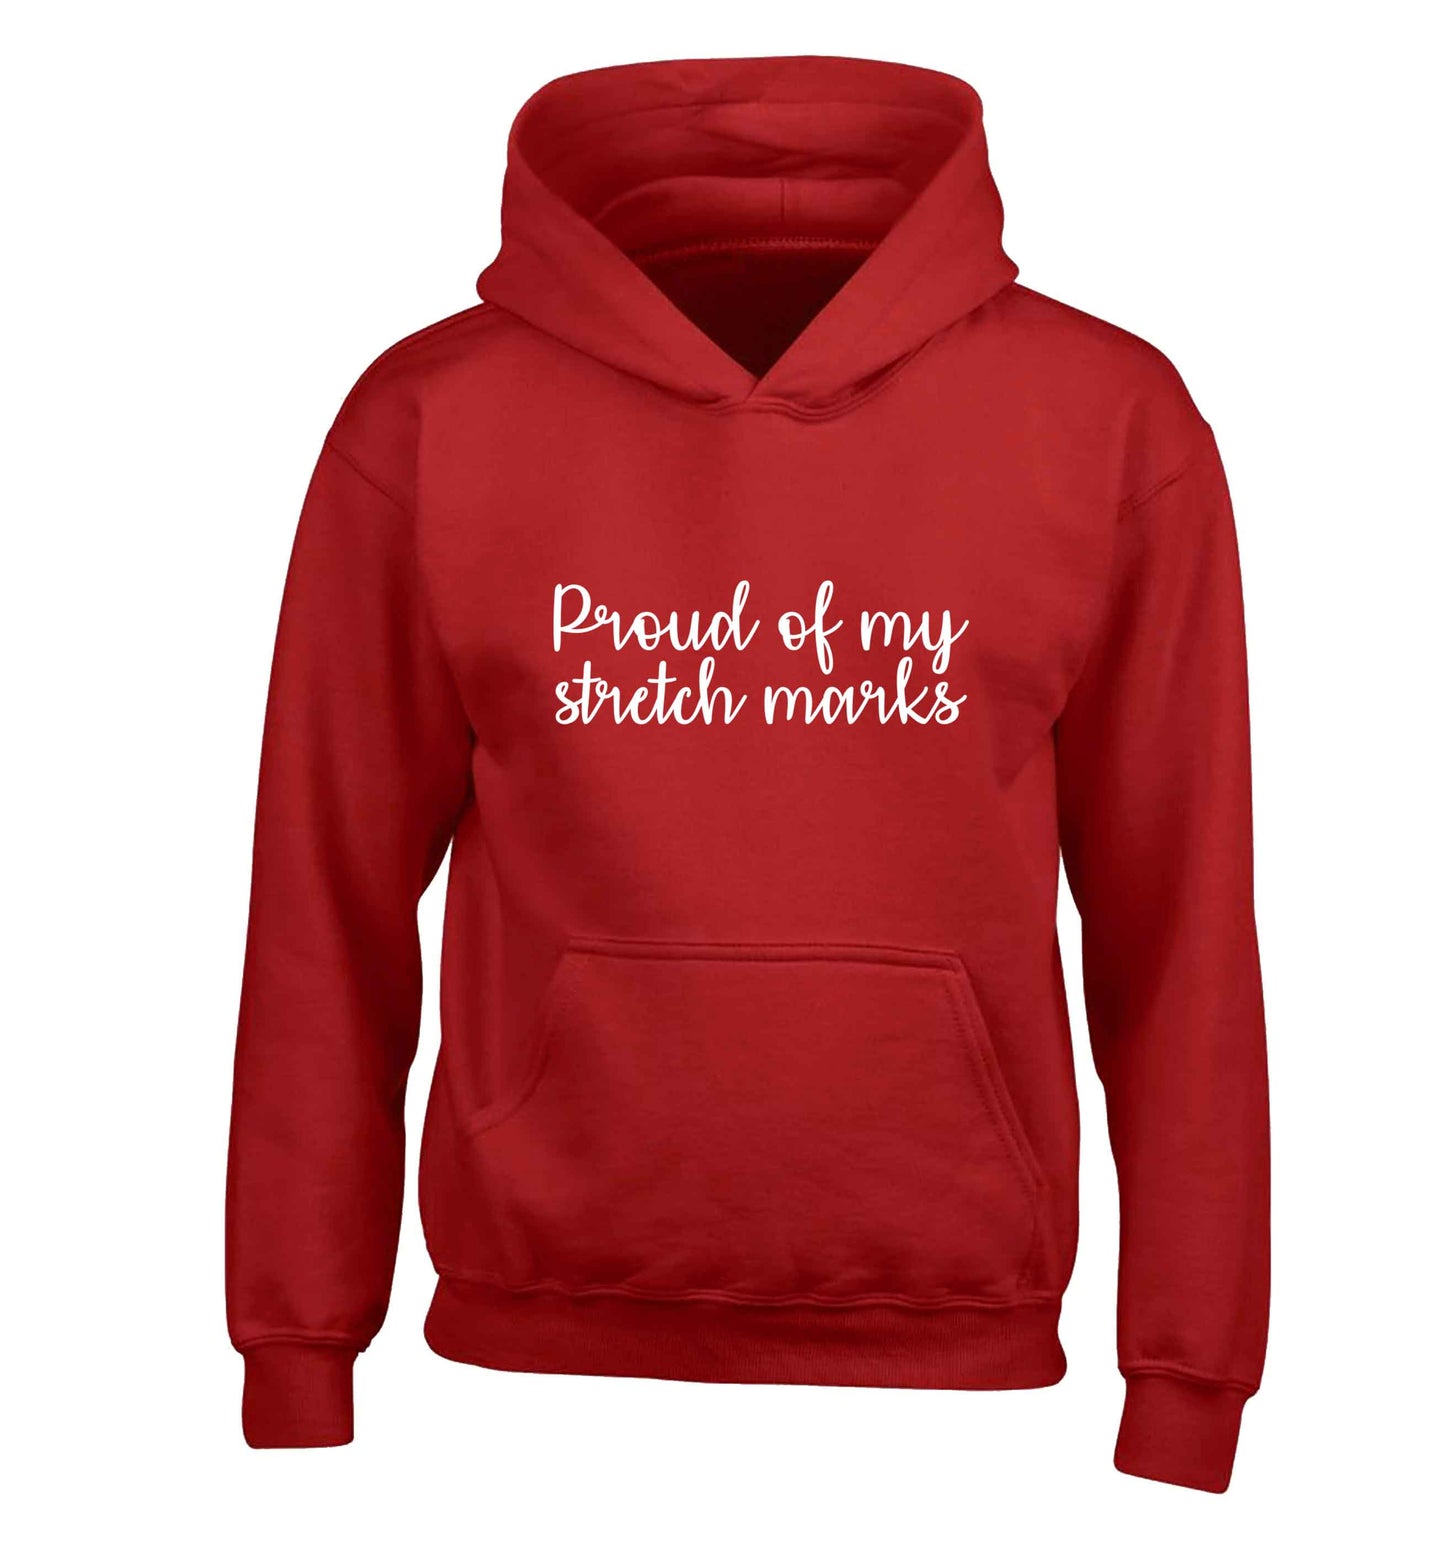 Proud of my stretch marks children's red hoodie 12-13 Years